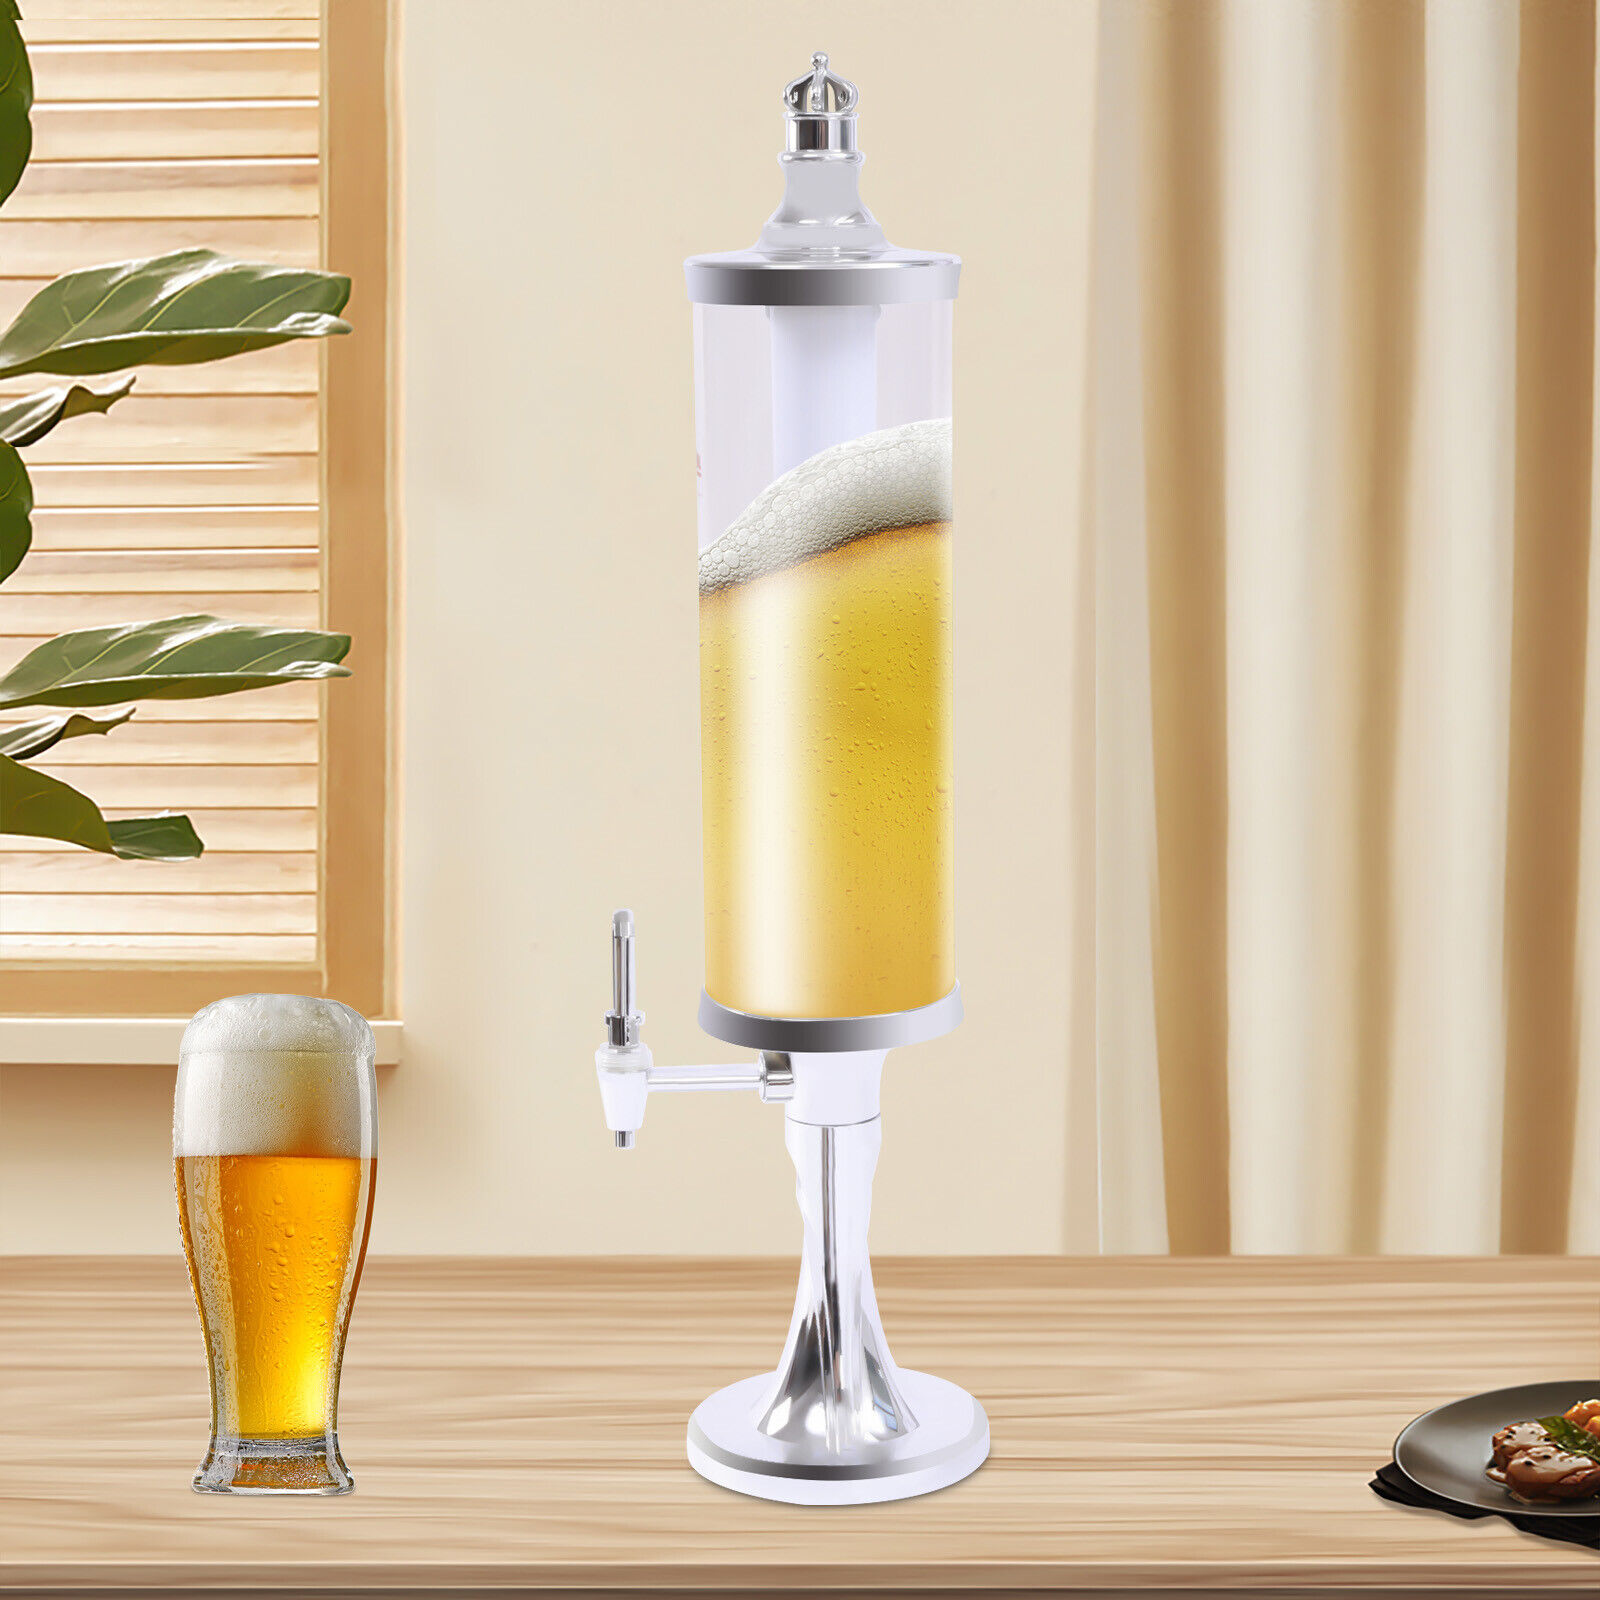 Miumaeov 3L/0.8 Gallon Drink Tower Beverage Dispenser with LED Light Drink  Beer Tower Container for Party Bar Countertop Beverage Server Brown & Clear  